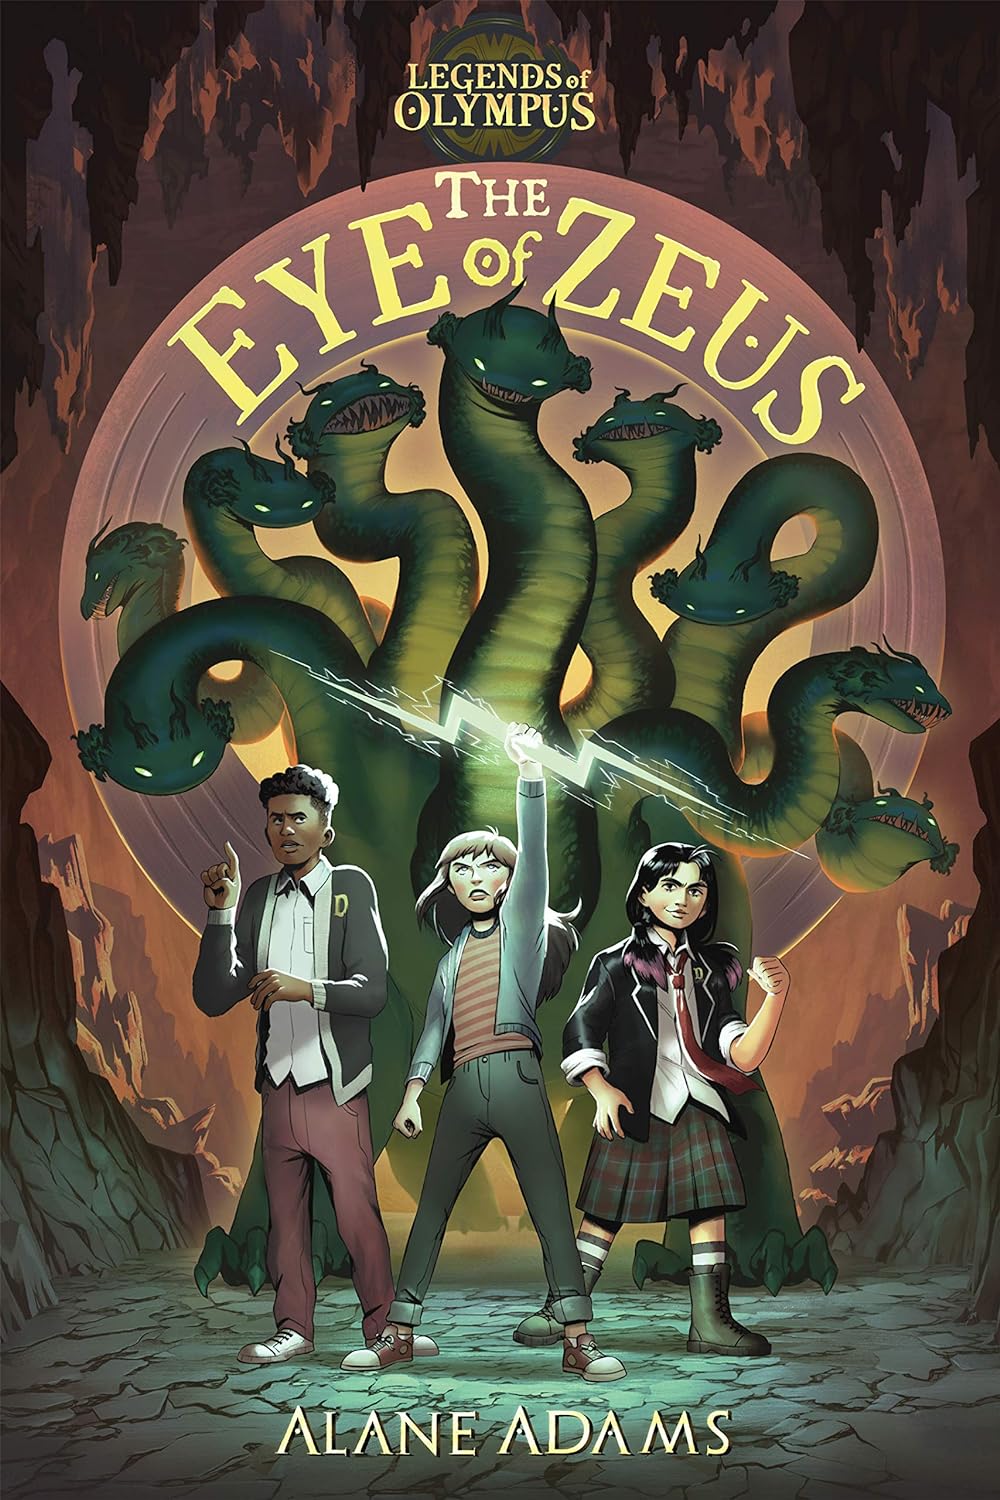 Image for "The Eye of Zeus"